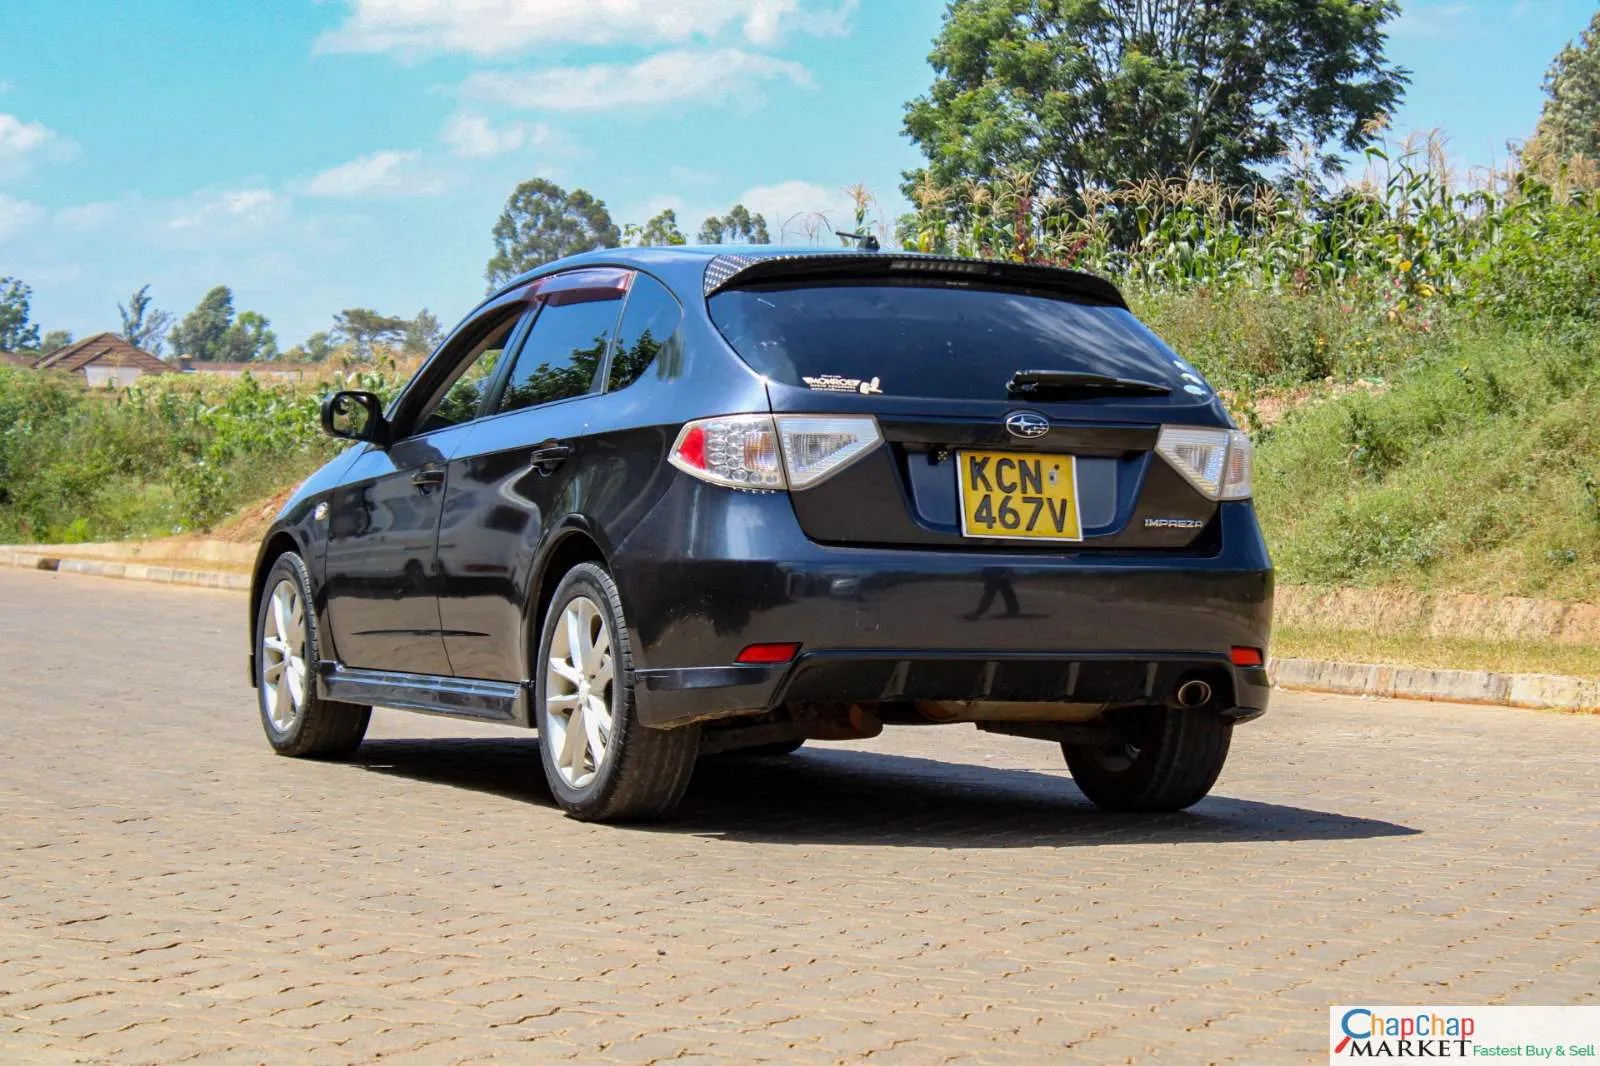 Subaru Impreza for sale in kenya 🔥 QUICK SALE You Pay 20% deposit Trade in Ok hire purchase installments 🔥